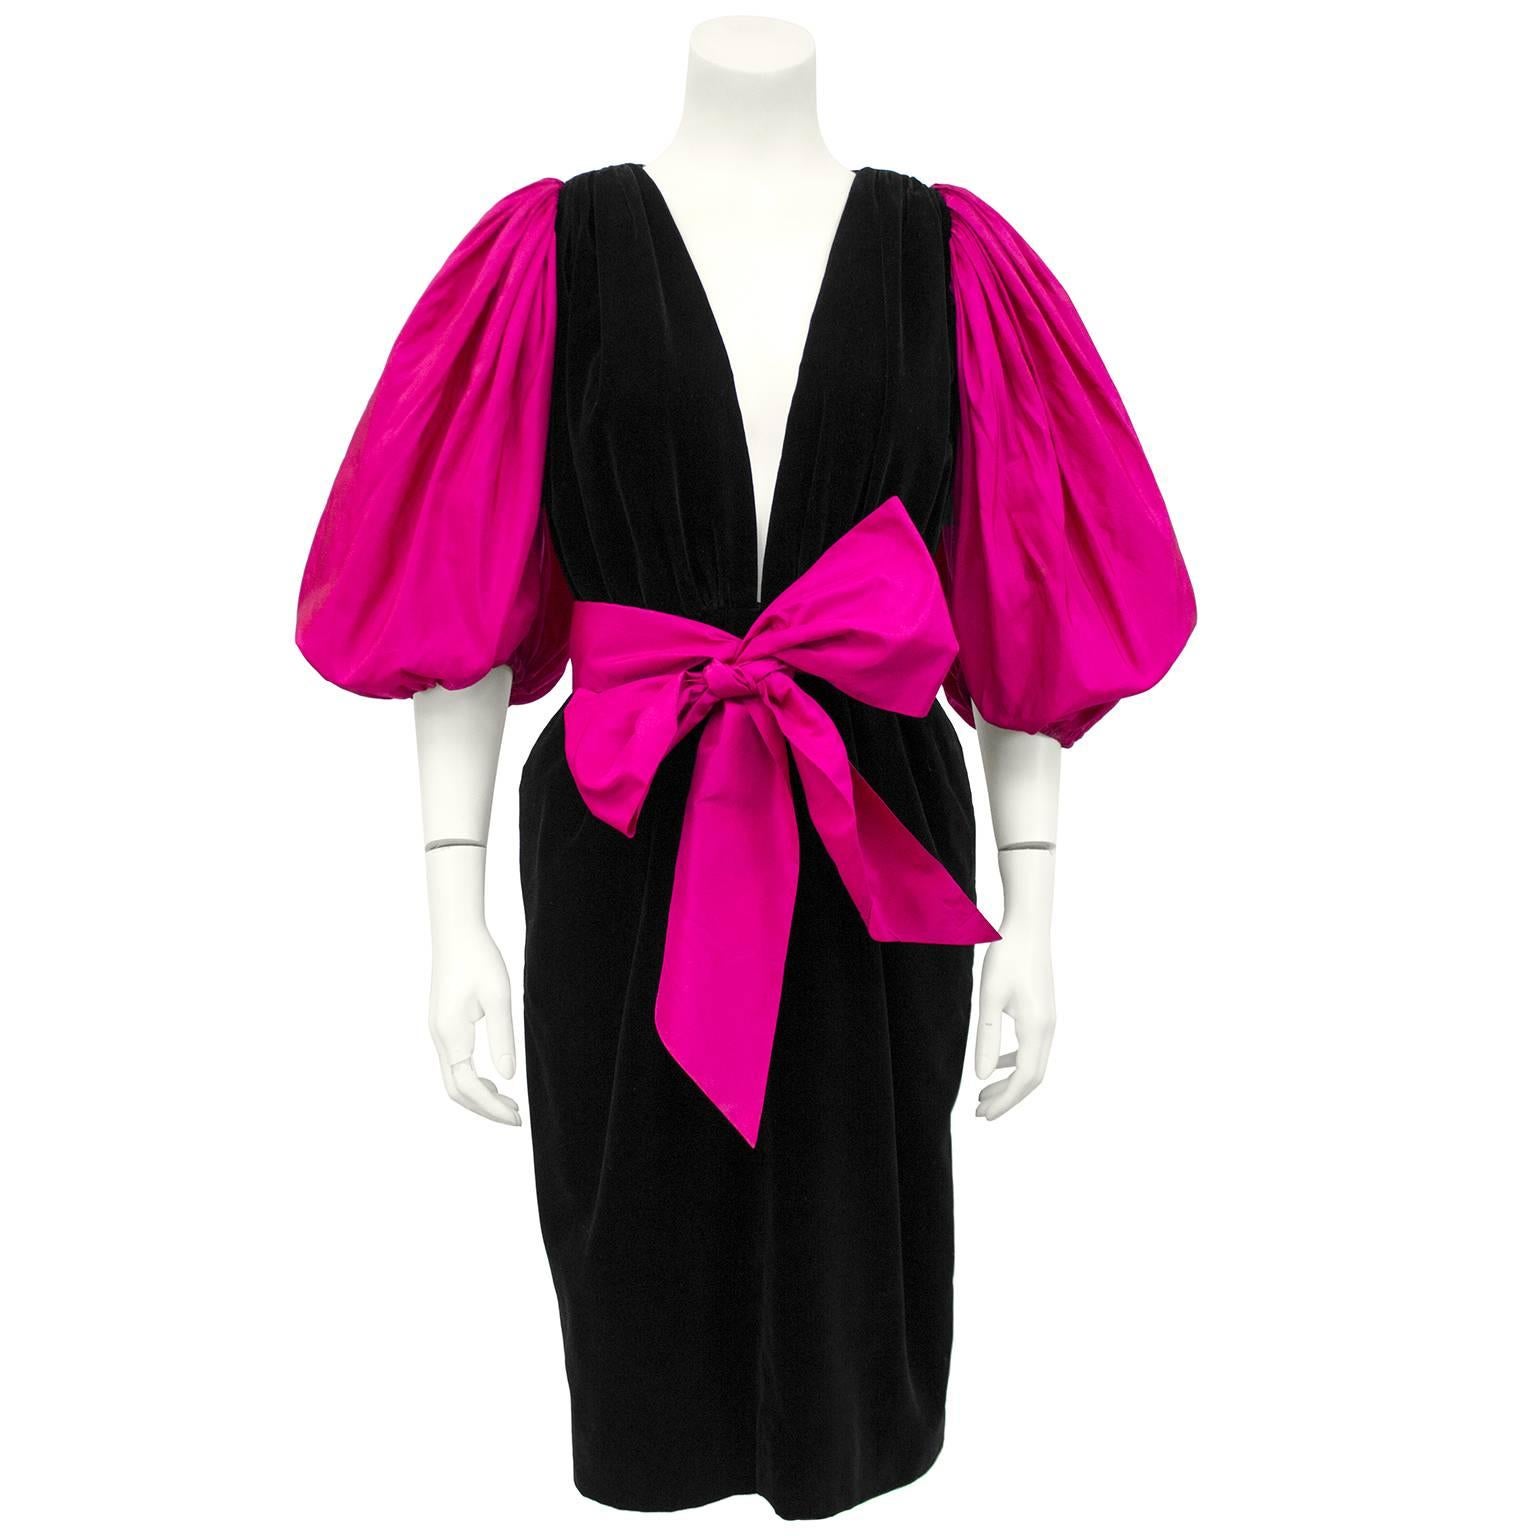 1980s YSL/Yves Saint Laurent jet black velvet cocktail dress. Extremely deep v neck with fuchsia silk taffeta balloon sleeves and large bow detail at waist. Excellent vintage condition. Marked FR 38, Fits like at US 4.   

Sleeve 19